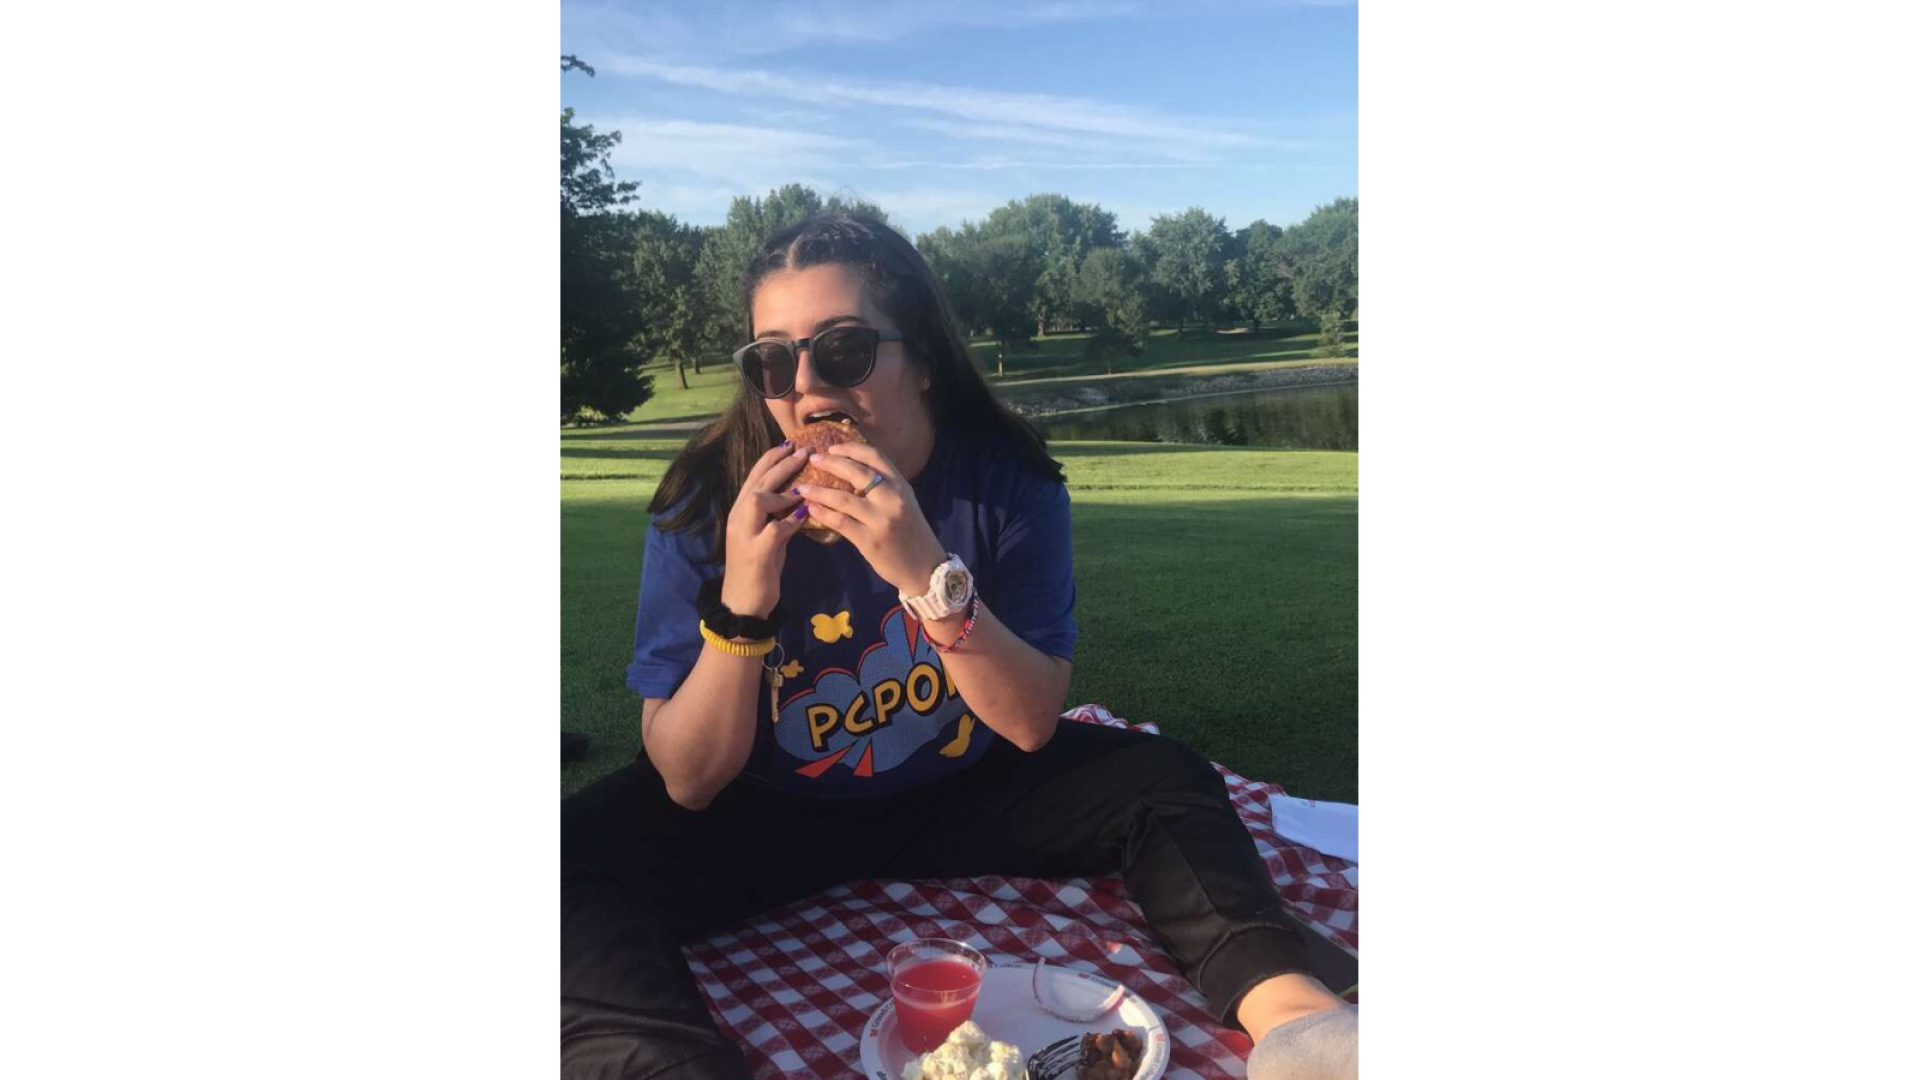 Eva biting into a sandwich at a picnic she is sitting on a red and white checked cloth with the rest of her meal between her legs